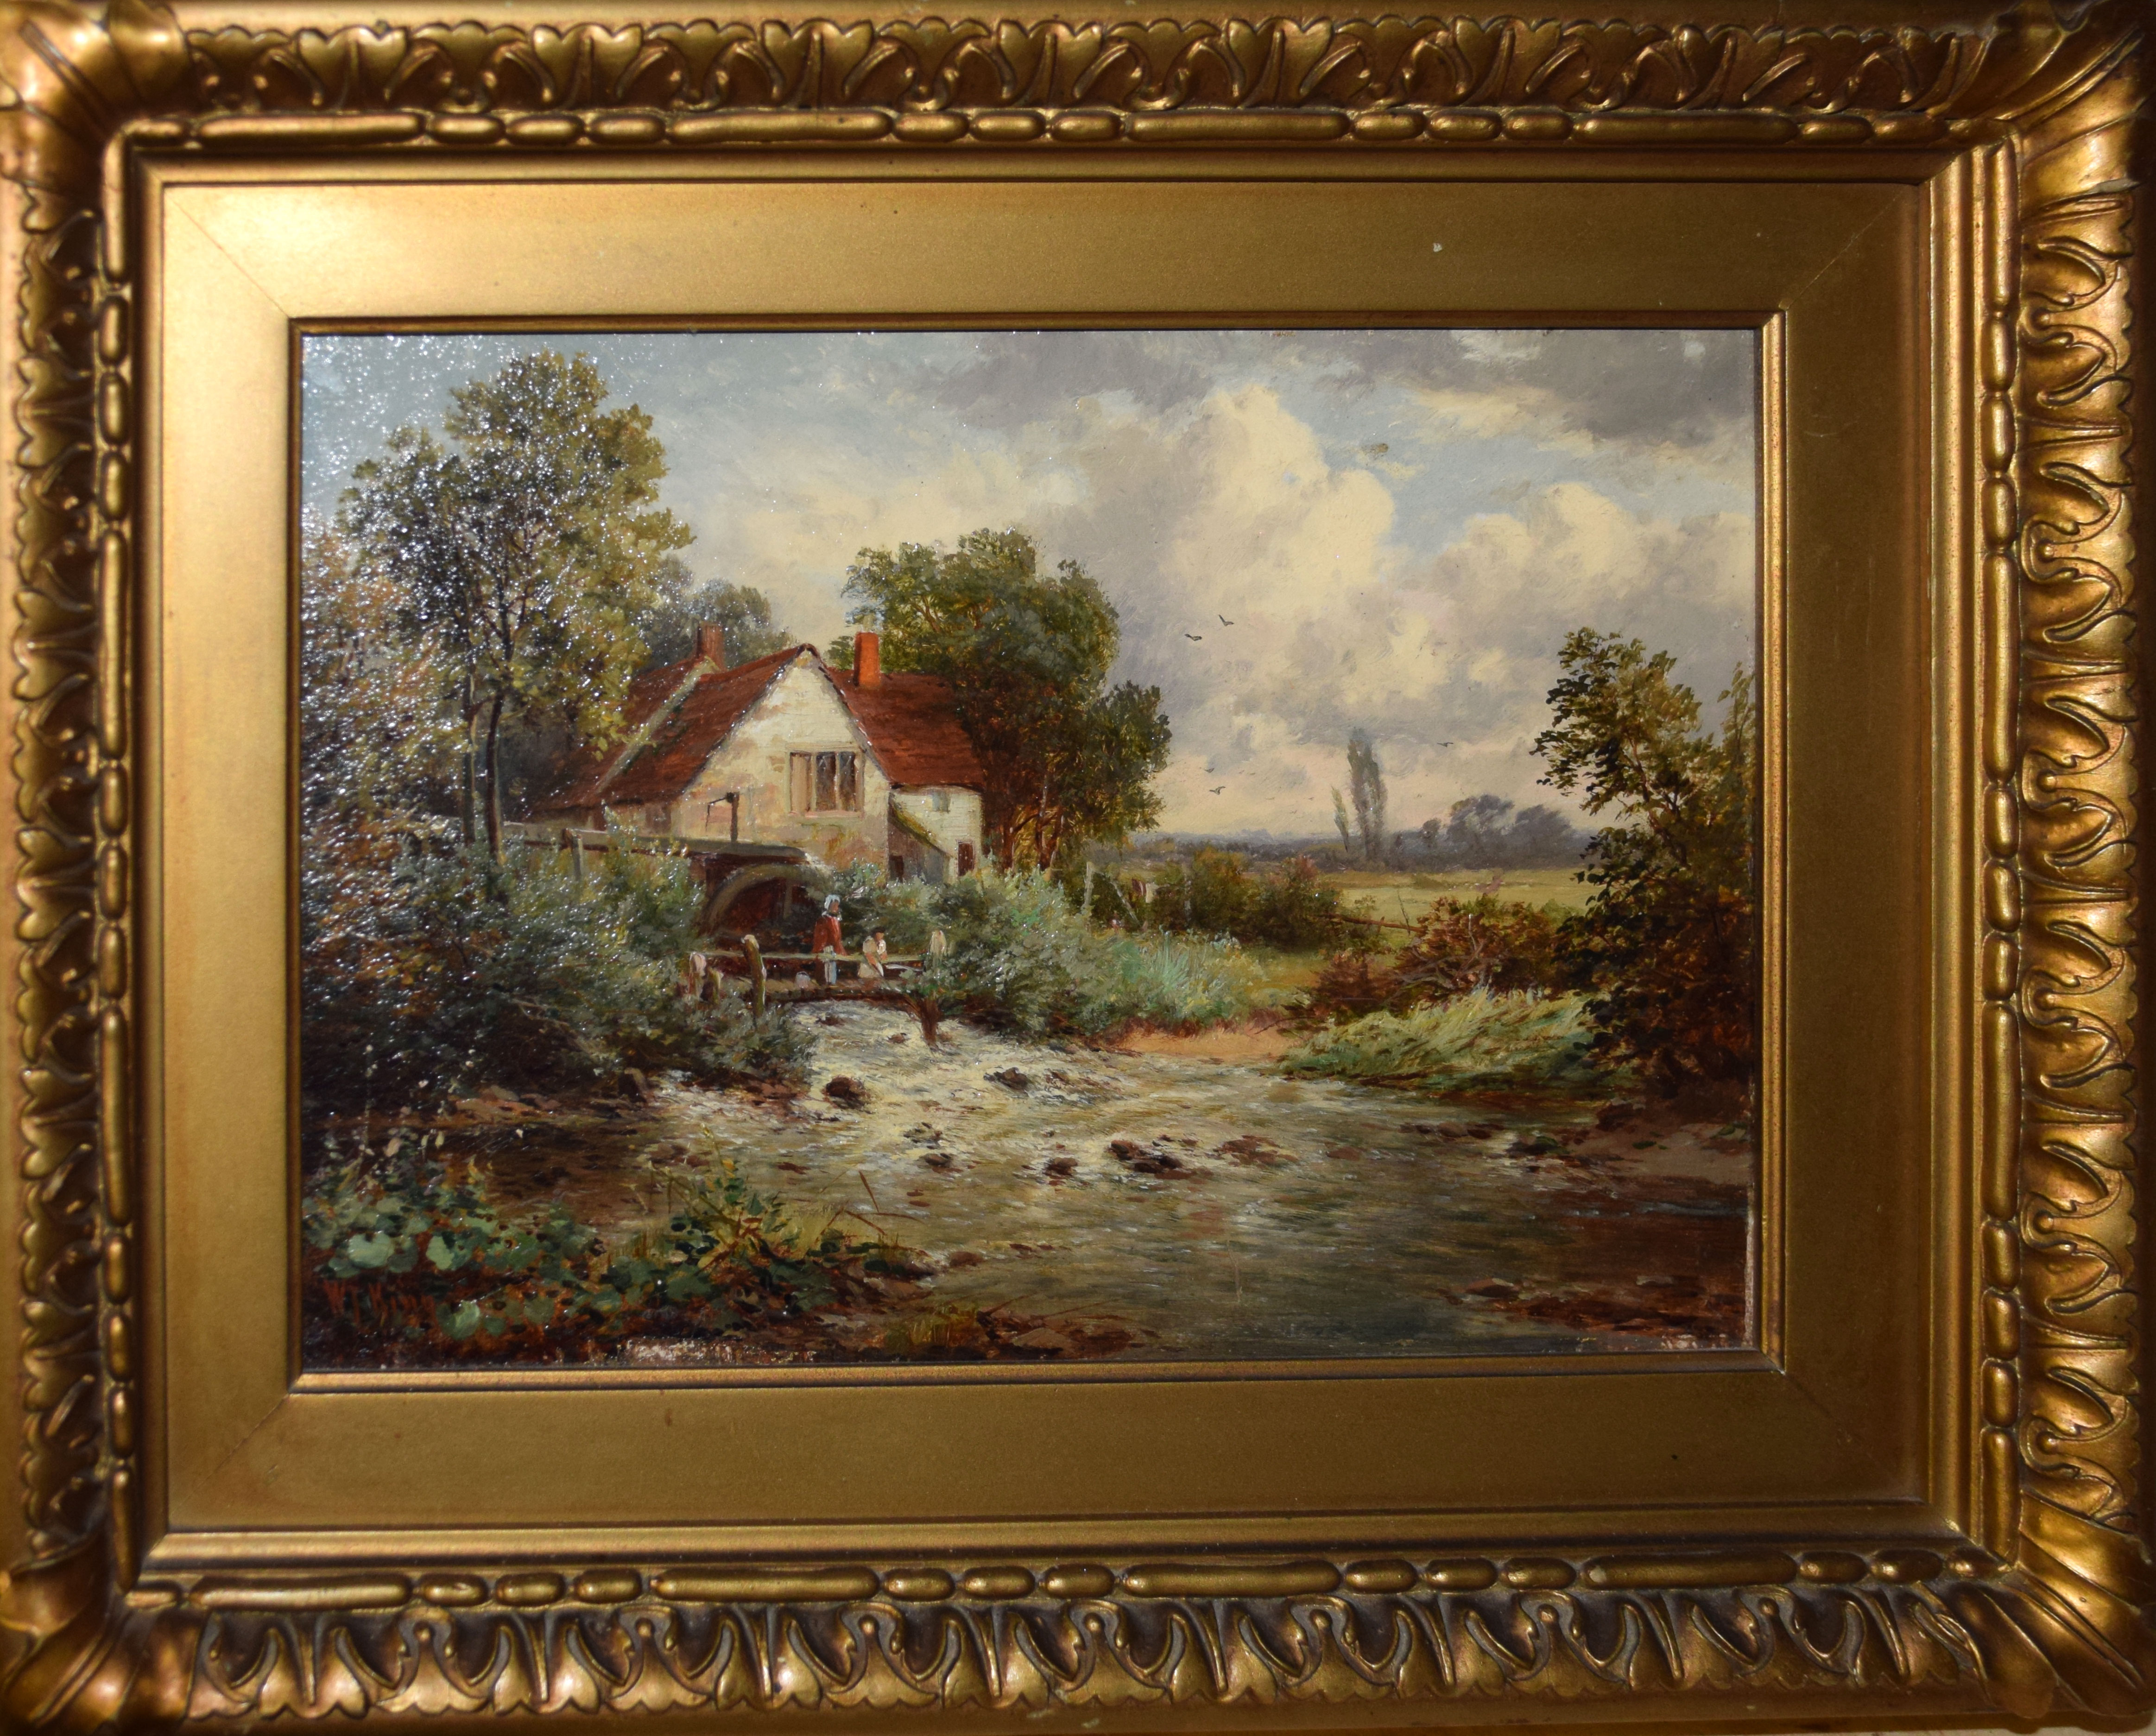 W J King, River landscape with figures by a Mill, oil on panel, signed lower left, 17 x 24cm